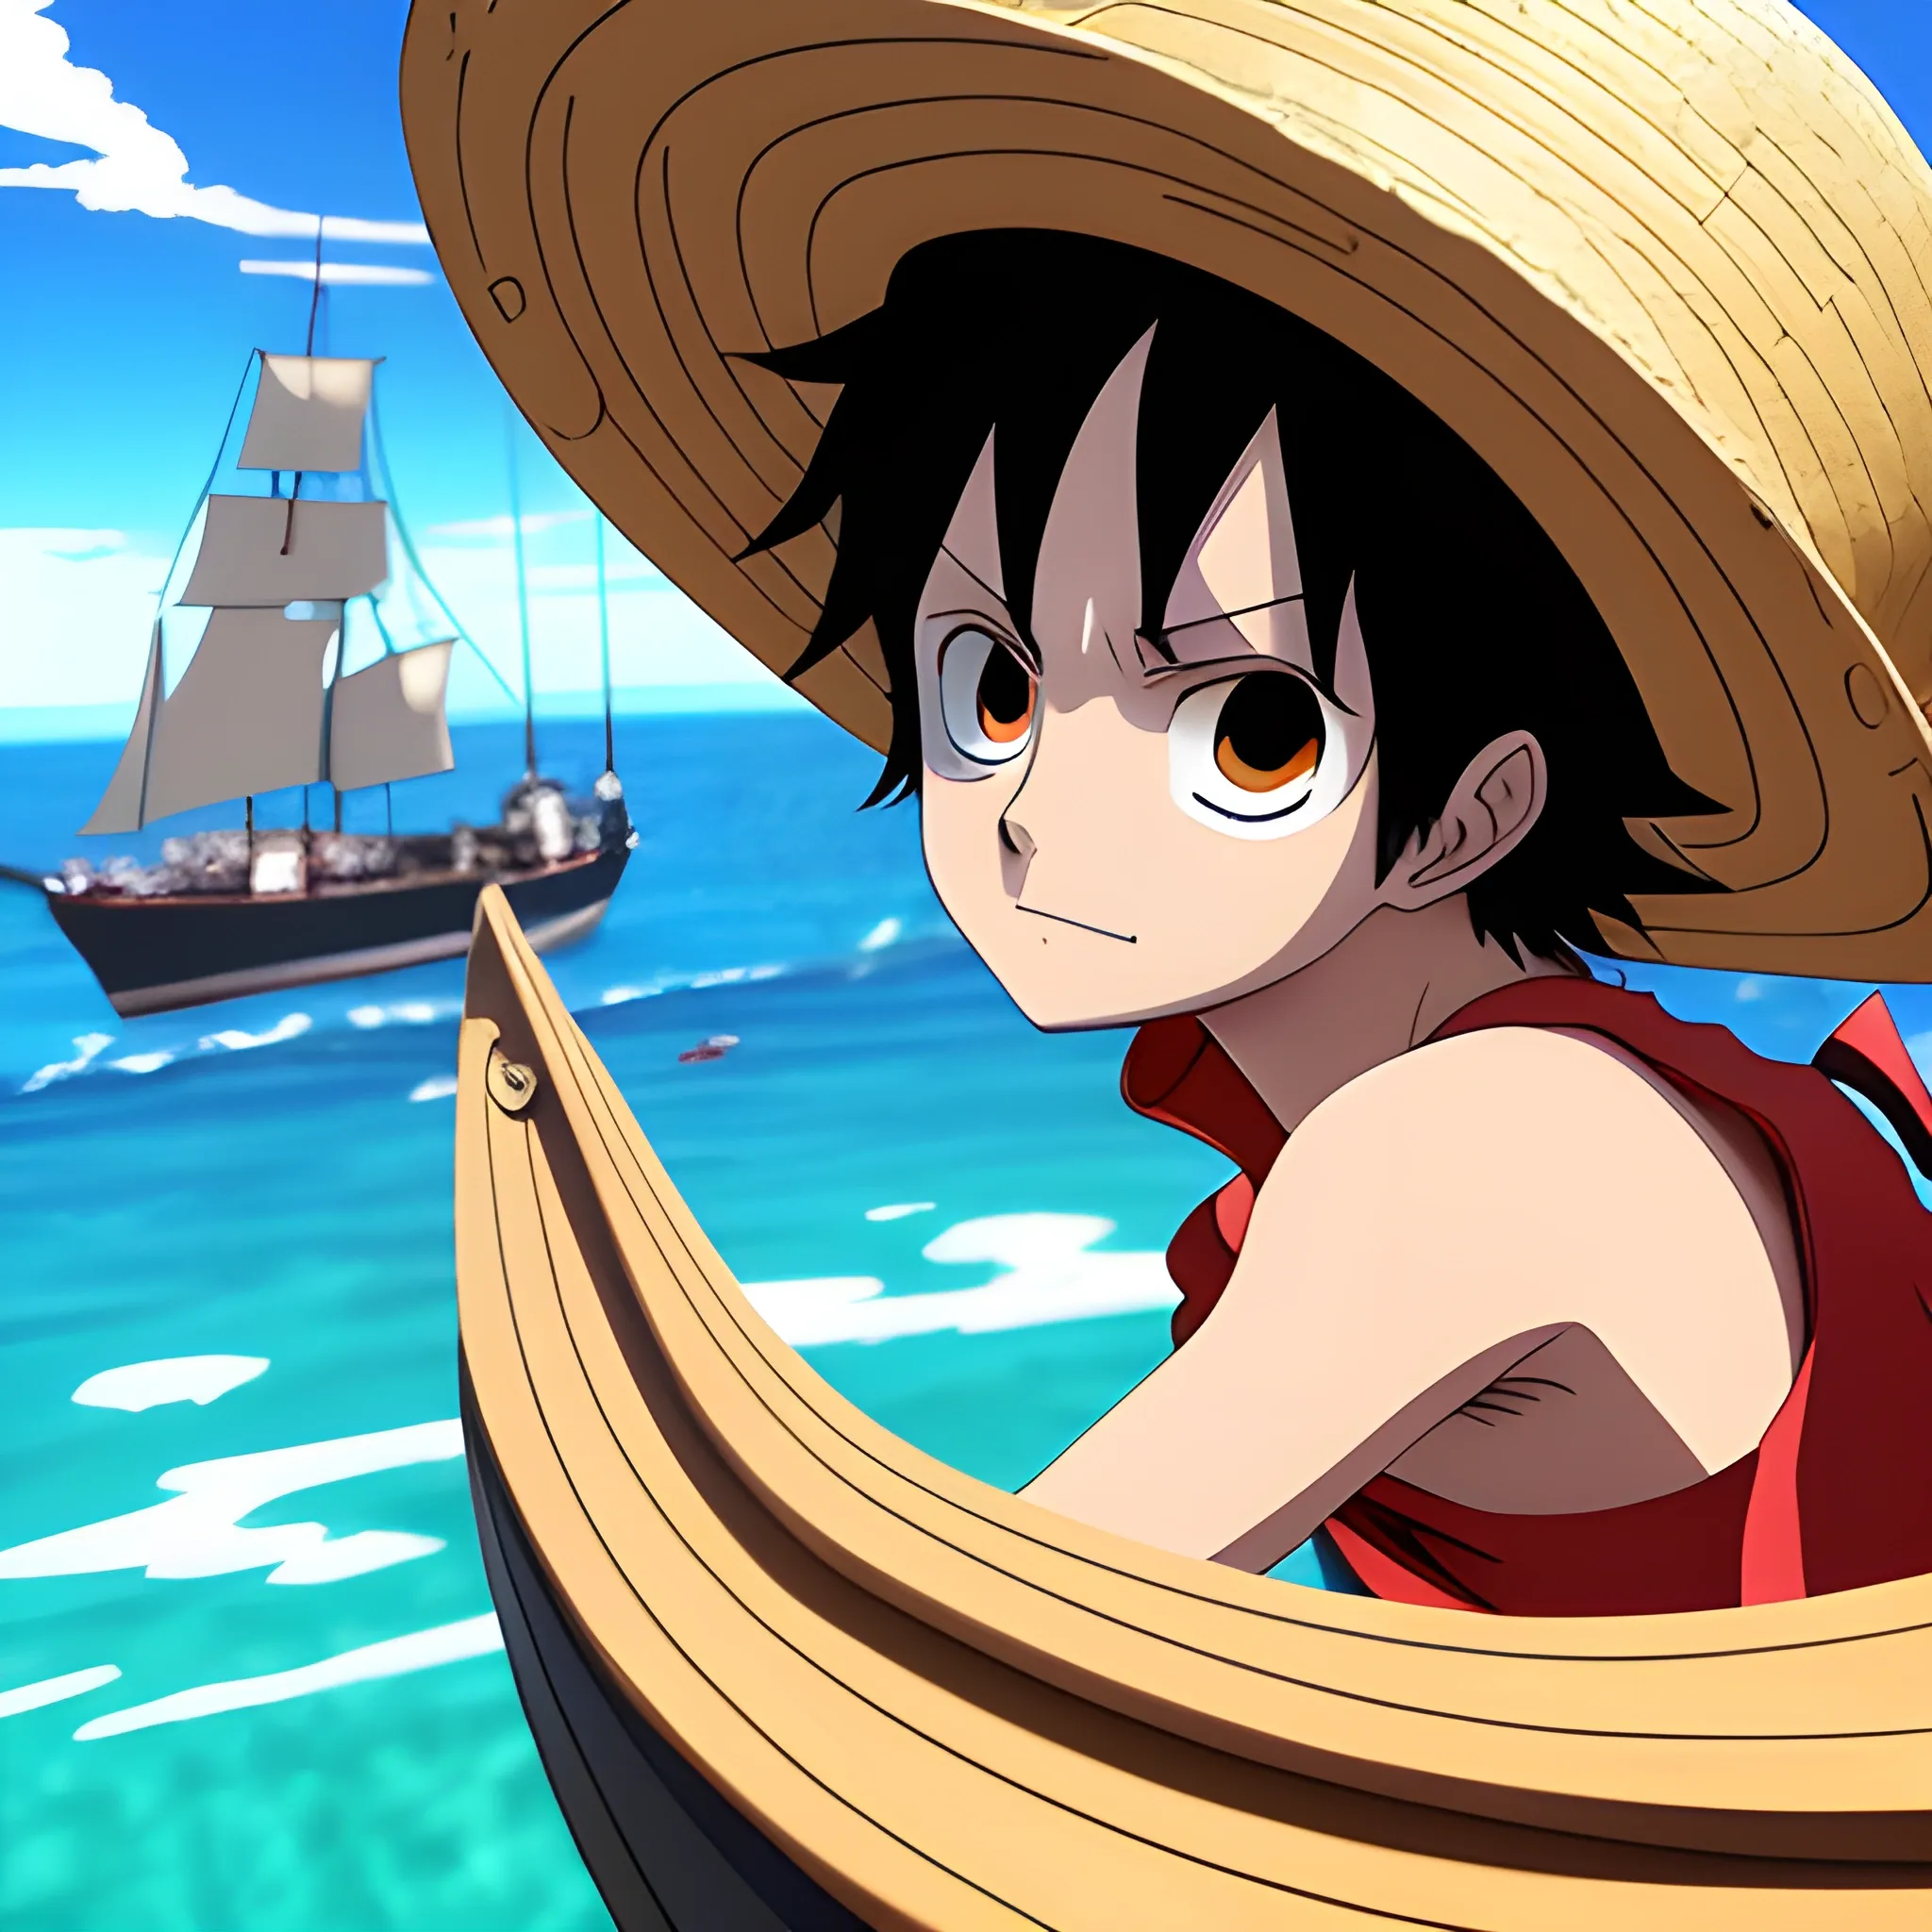 Lufy is in a fighting stance, with an intense, focused look on his face. His messy black hair and straw hat, ready to strike. In the background, you can see his boat and his traplation, suggesting that the scene takes place at night. The atmosphere is tense and exciting, as if Lufy is about to fight a powerful enemy. The image is created in an anime style, with sharp lines and shadows and vibrant colours. As for the camera, the image is shot from the bottom up, as if the viewer is looking at Lufy, in 3D. One Piece.